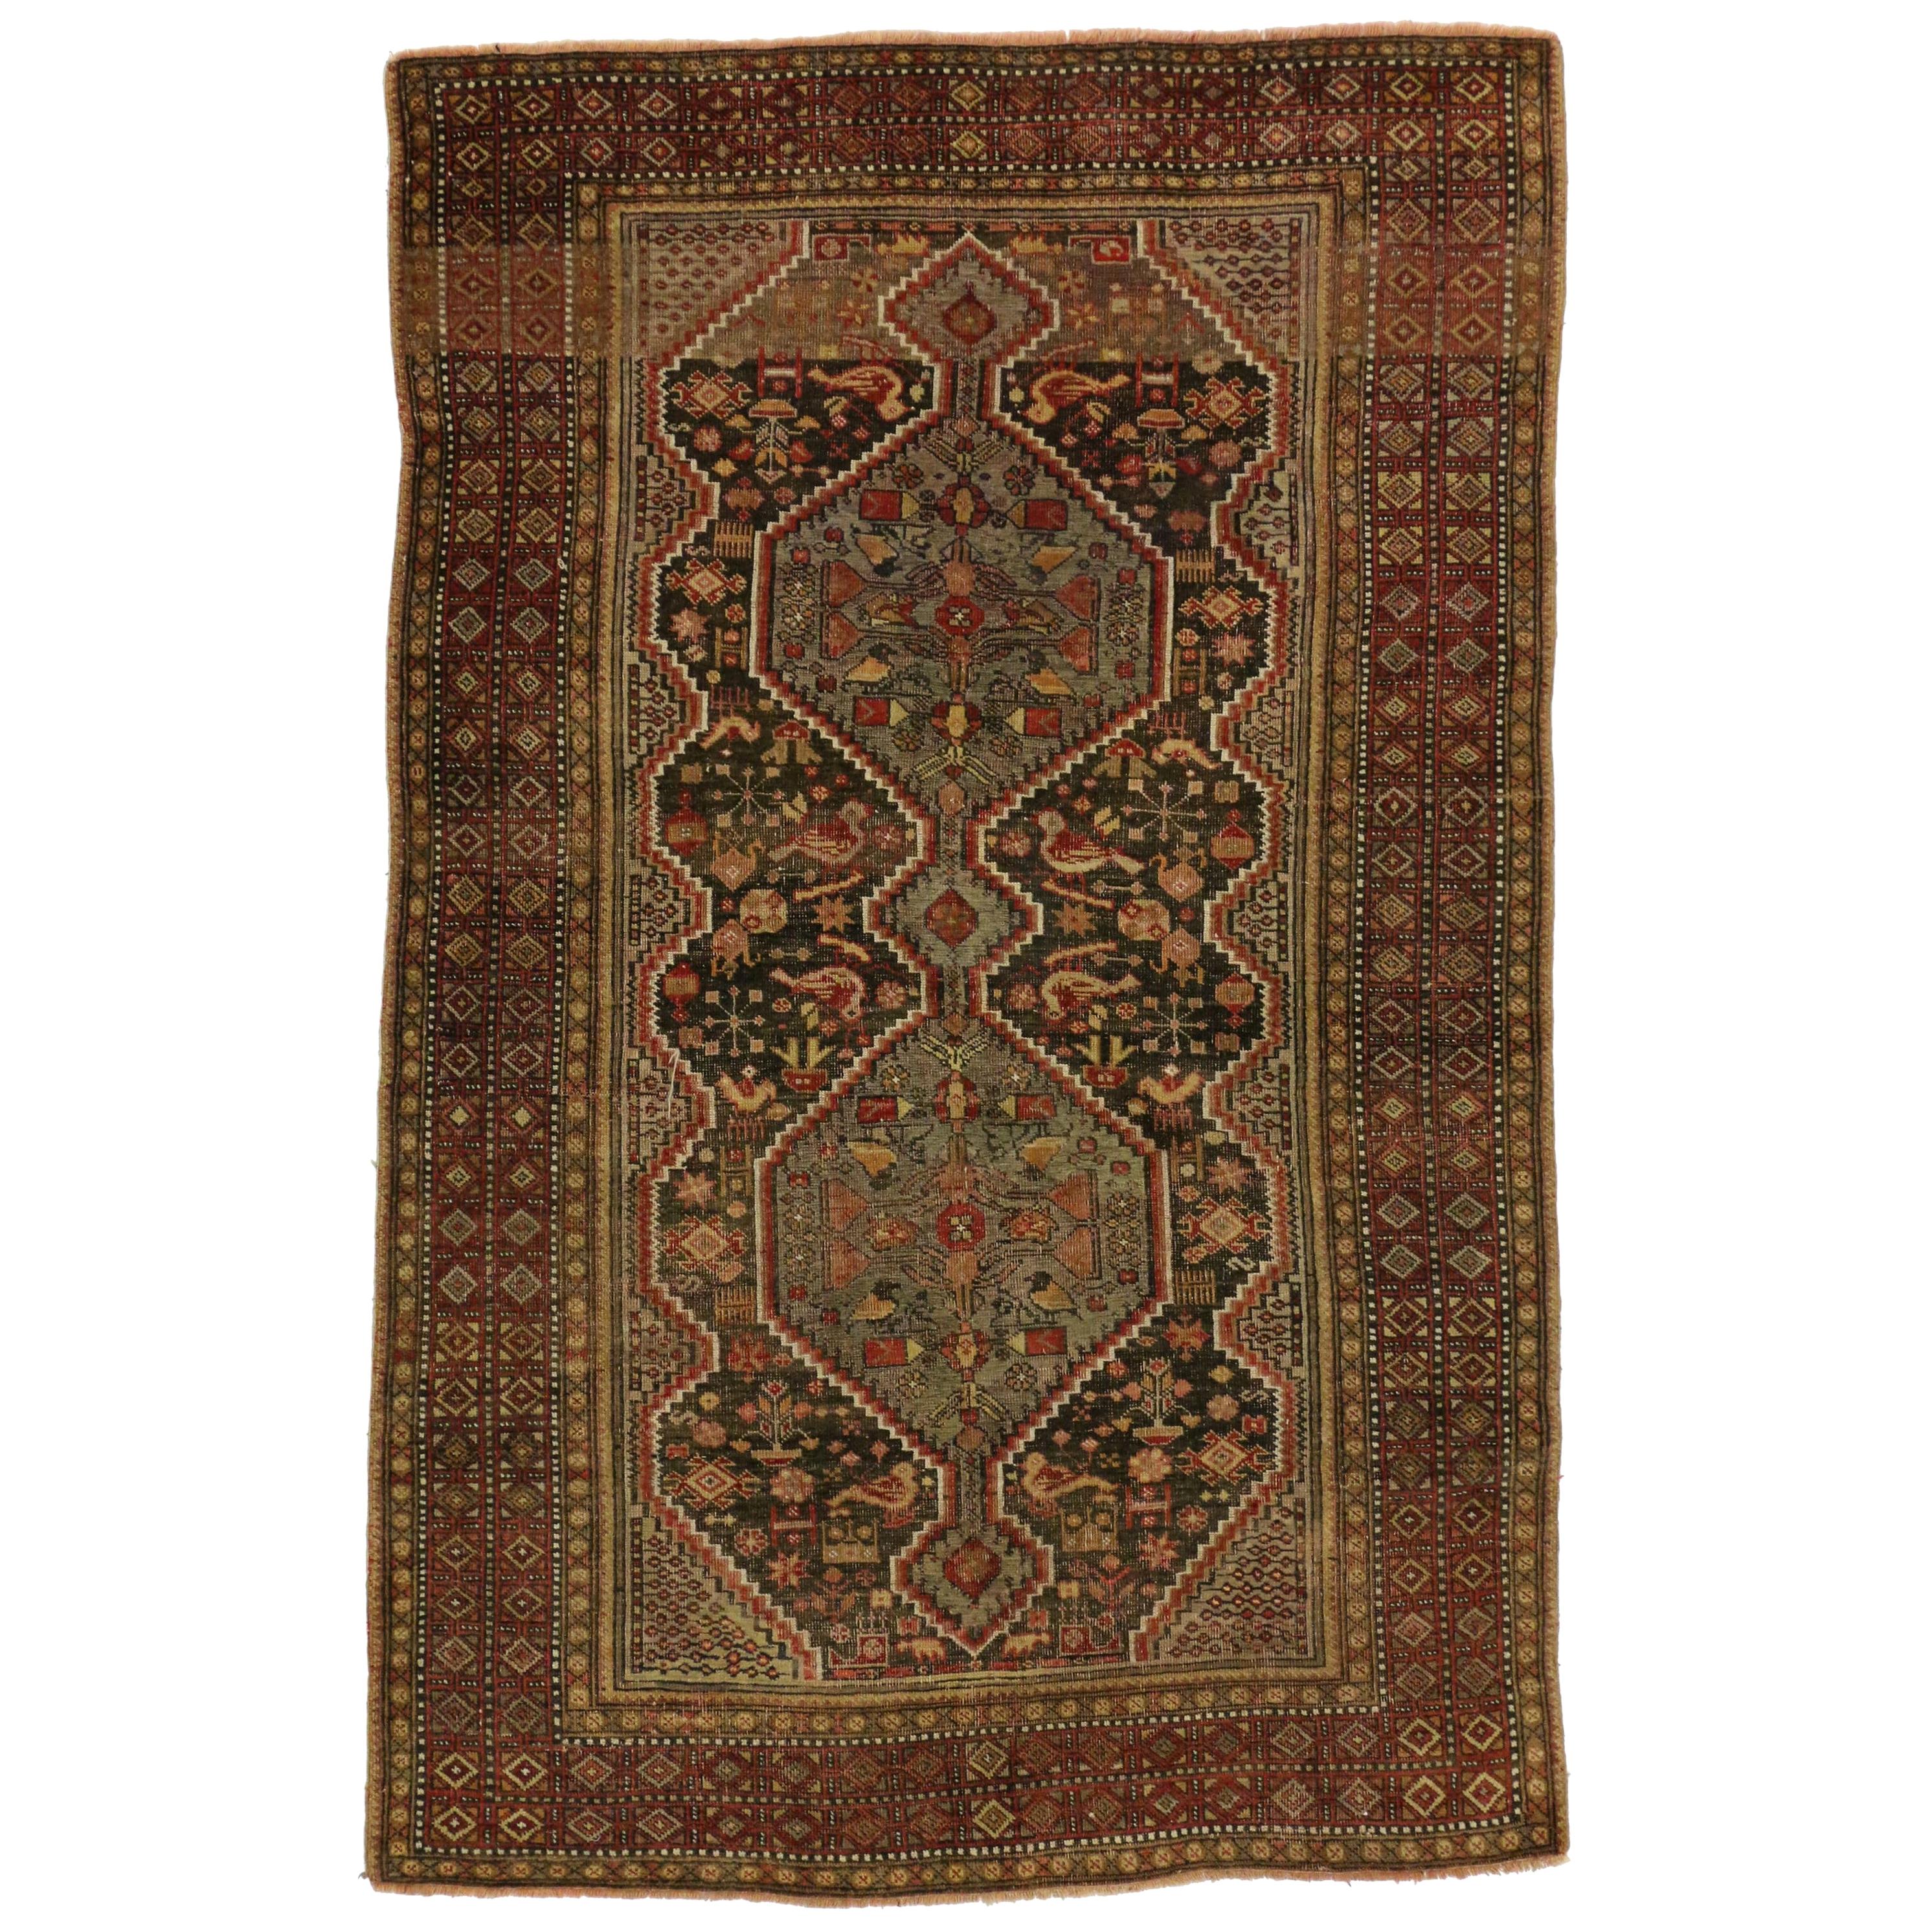 Distressed Antique Persian Shiraz Rug with Rustic Tribal Style